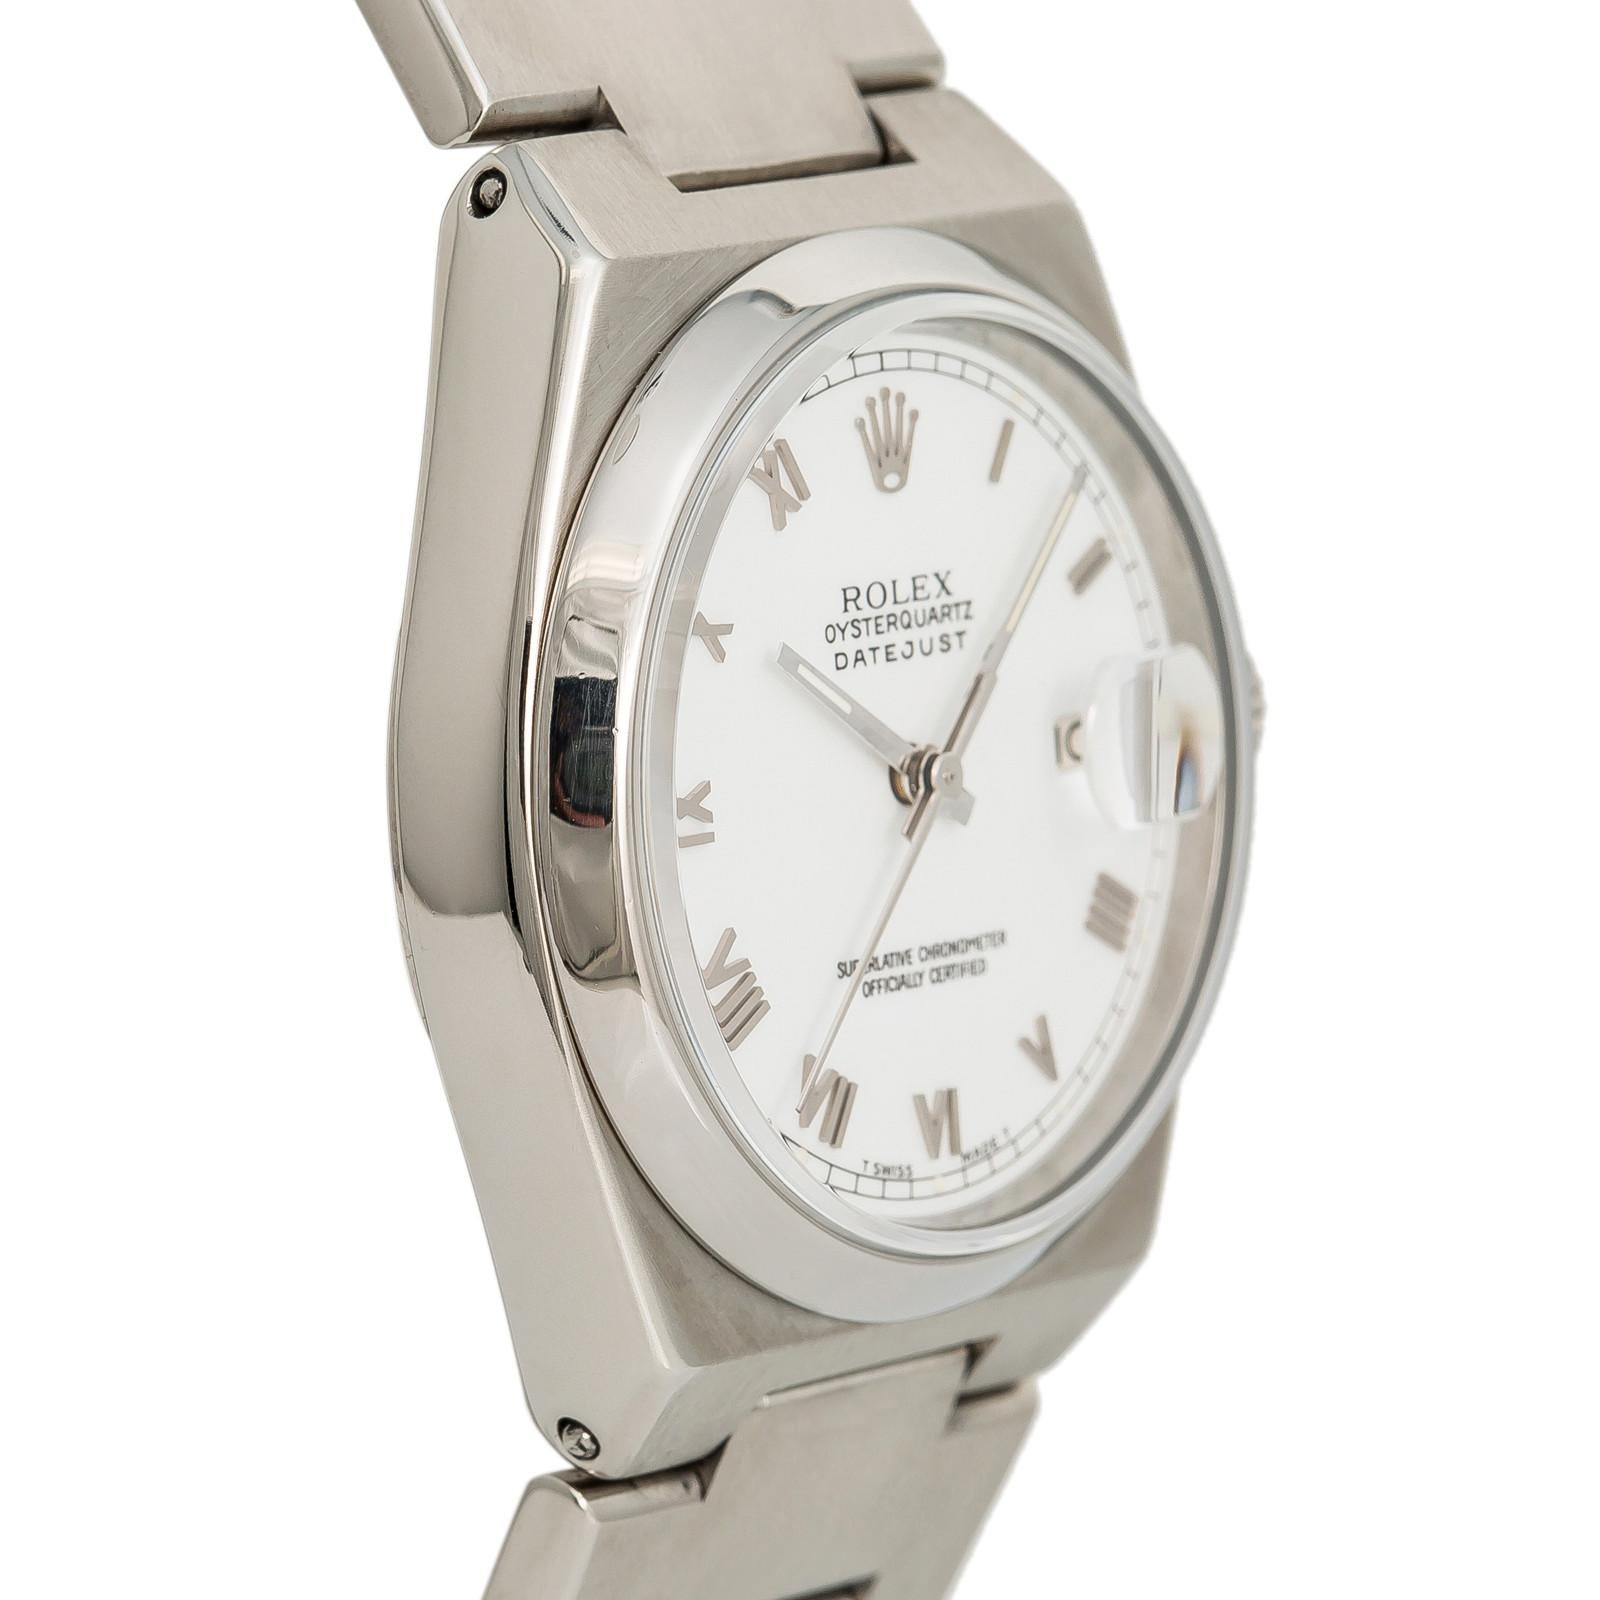 Rolex Oysterquartz 5154, Dial Certified Authentic In Excellent Condition For Sale In Miami, FL